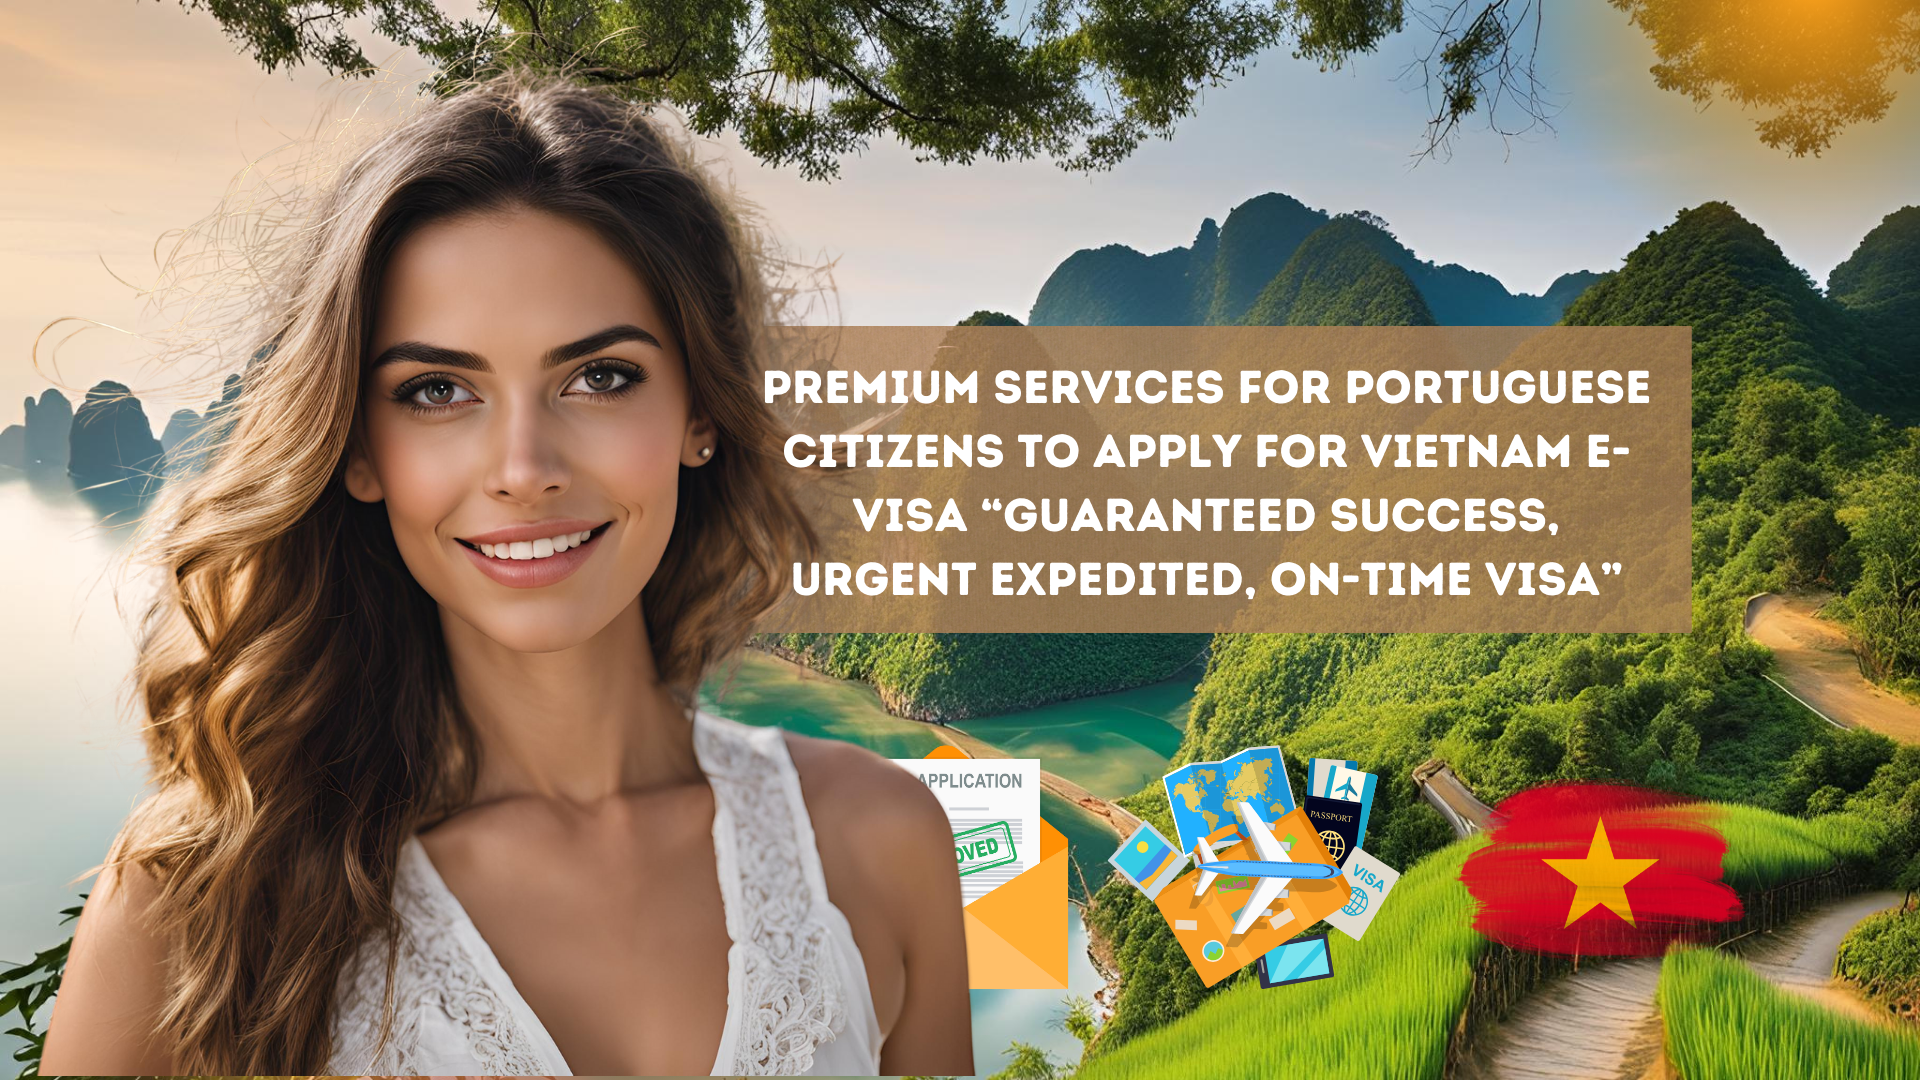 Premium Services for Portuguese Citizens to apply for Vietnam e-visa “Guaranteed success, urgent expedited, on-time visa”